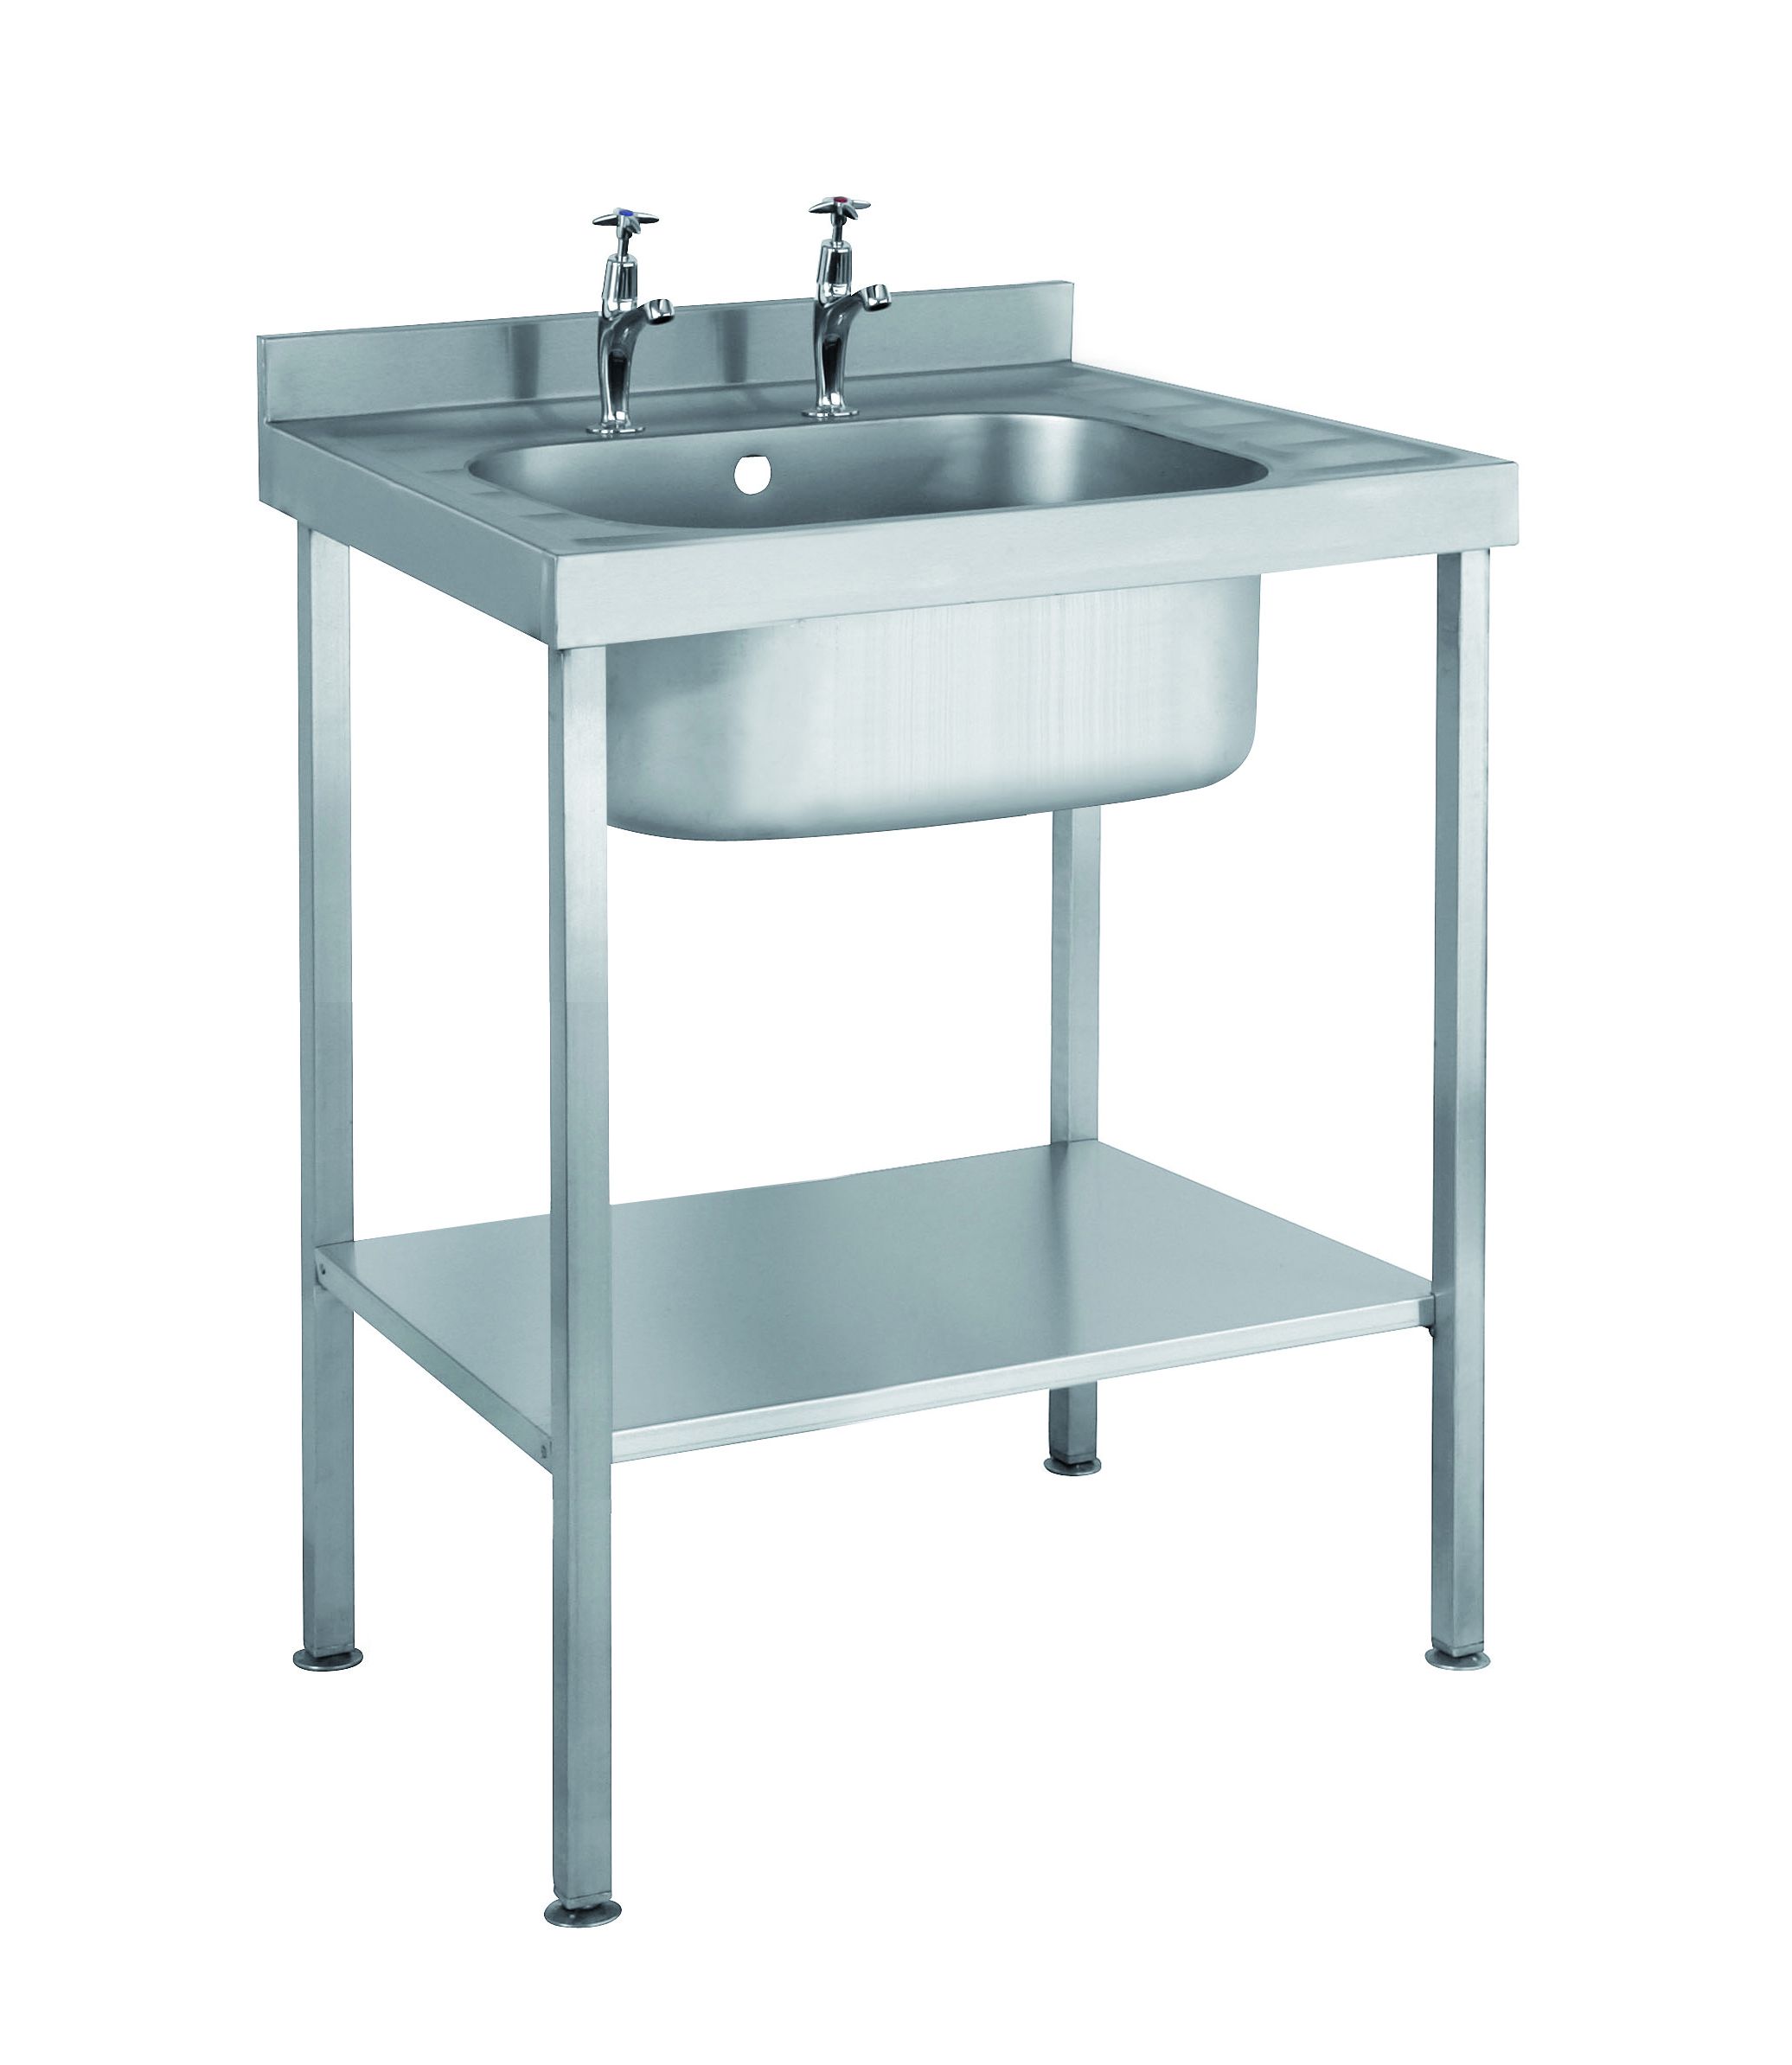 Parry SINKSBND - Single Bowl No Drainer Stainless Steel Assembled Sink